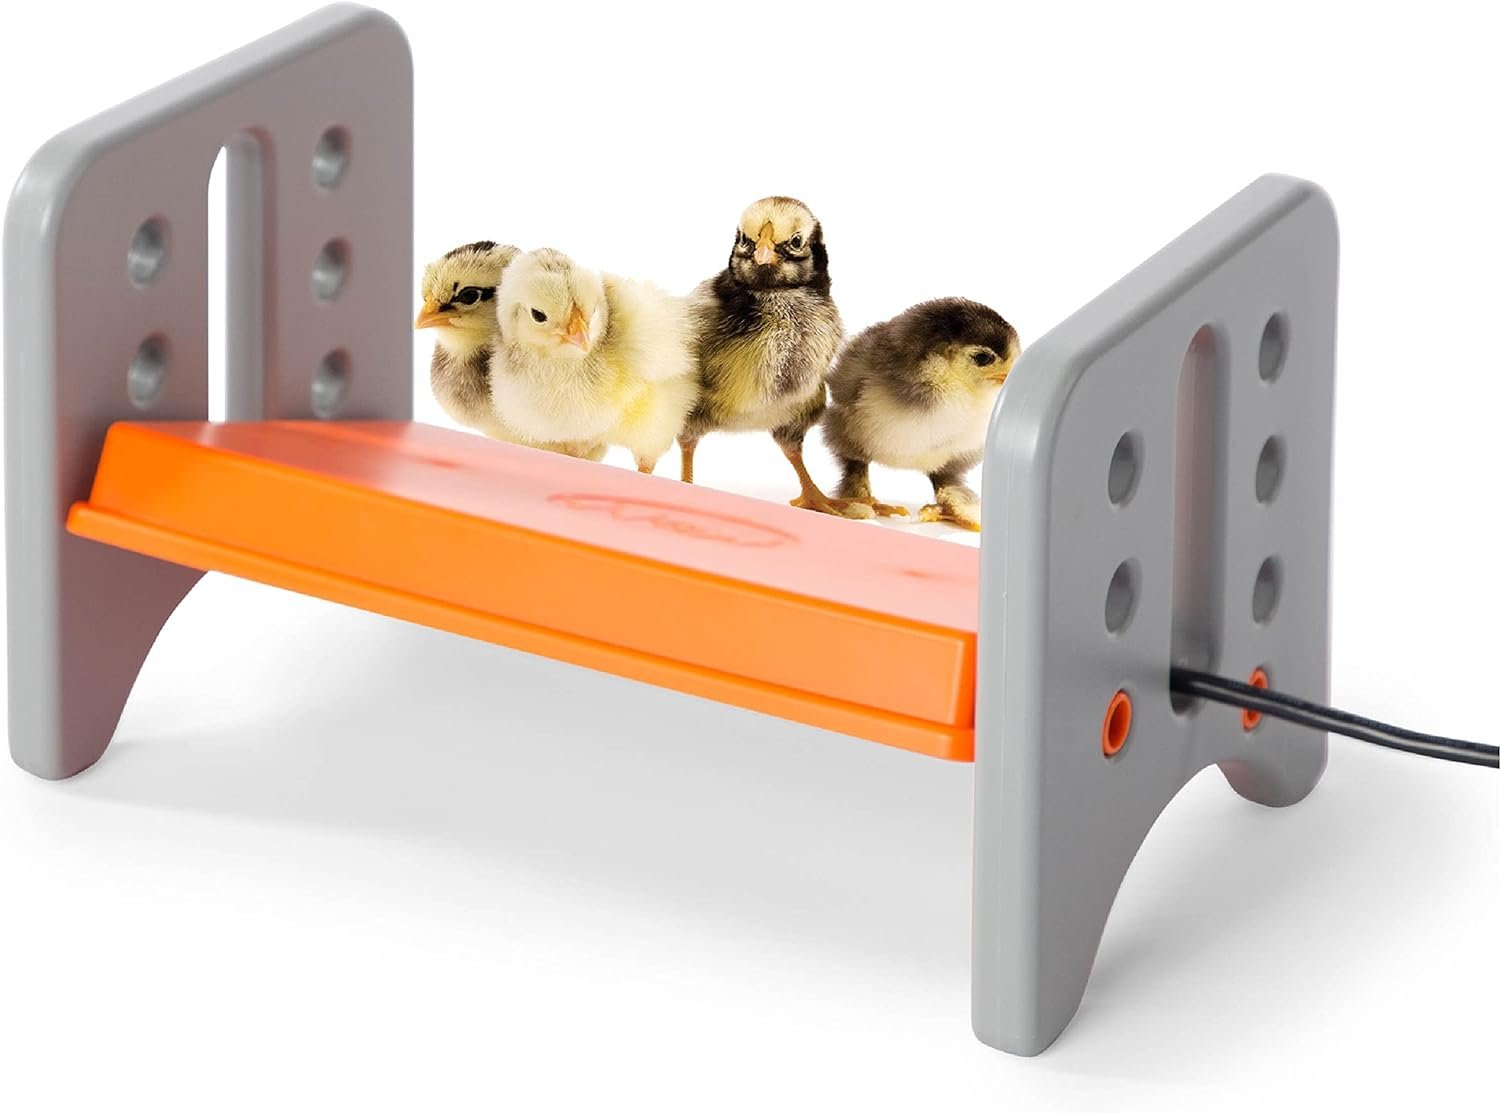 KH Pet Products Thermo Chicken Brooder, Brooder Heater for Chicks, Chick Brooder Plate, Safe Alternative to Heat Lamp for Chickens - Gray/Orange Small 8 X 13.5 X 8 Inches